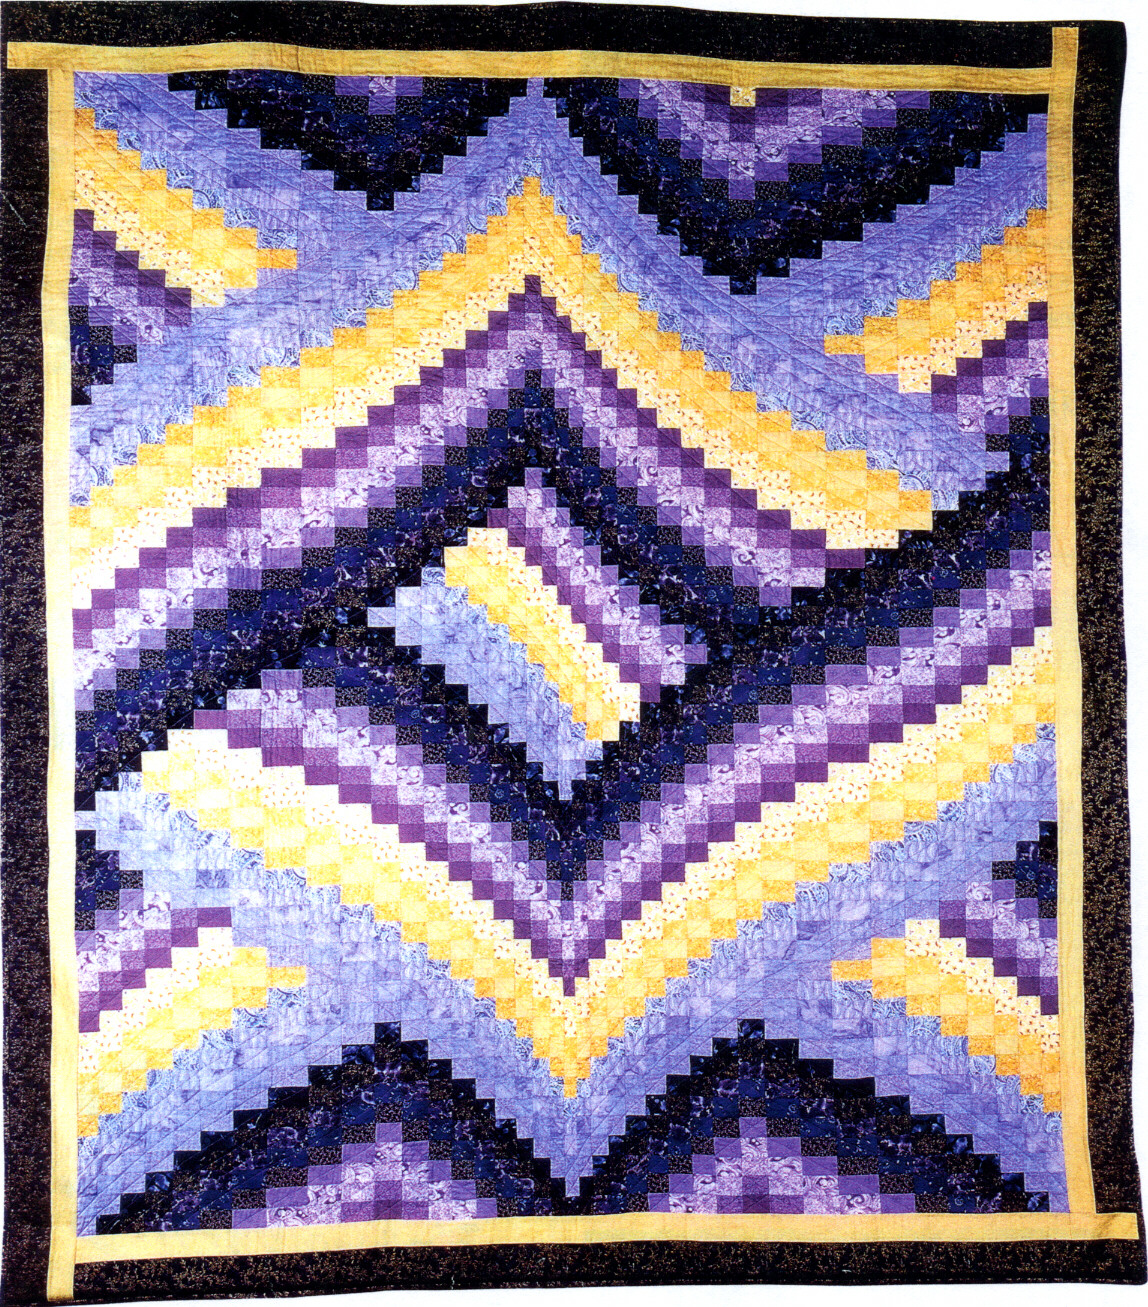 How Many Different Fabrics Can Be Used In A Bargello Quilt?